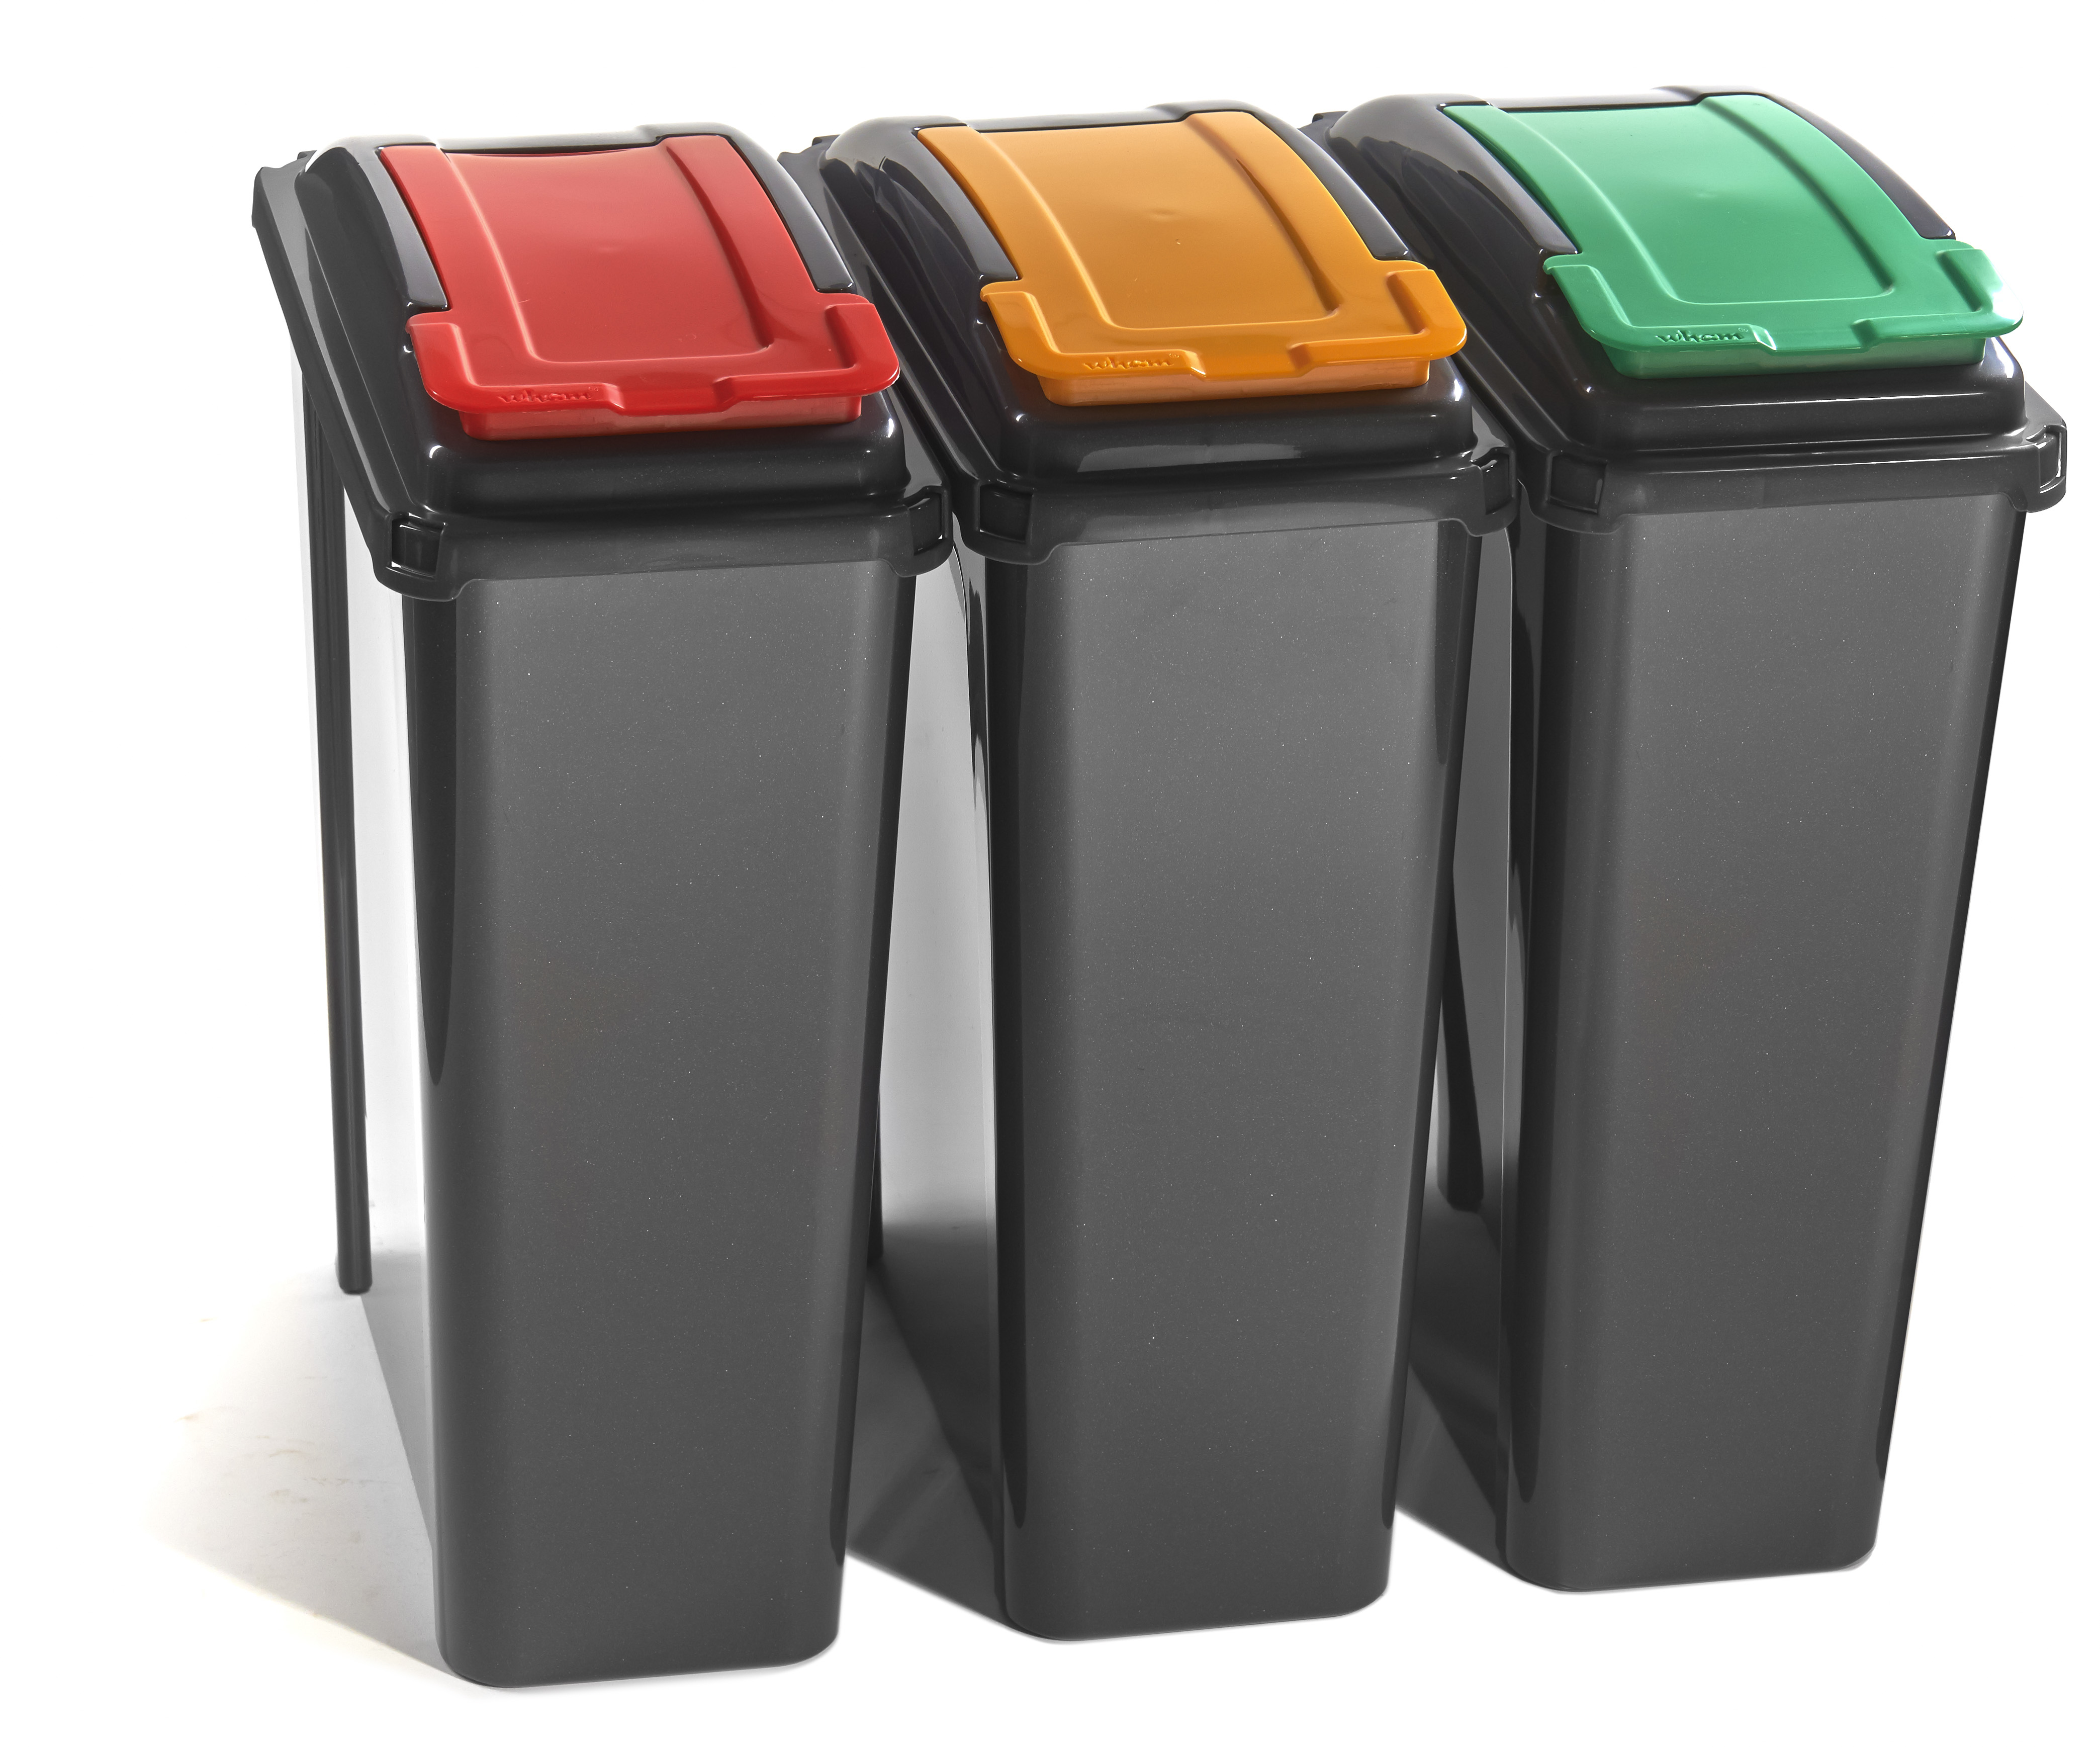 25 Litre Lift Top Recycling Bins with Coloured Lids & Recycling Label